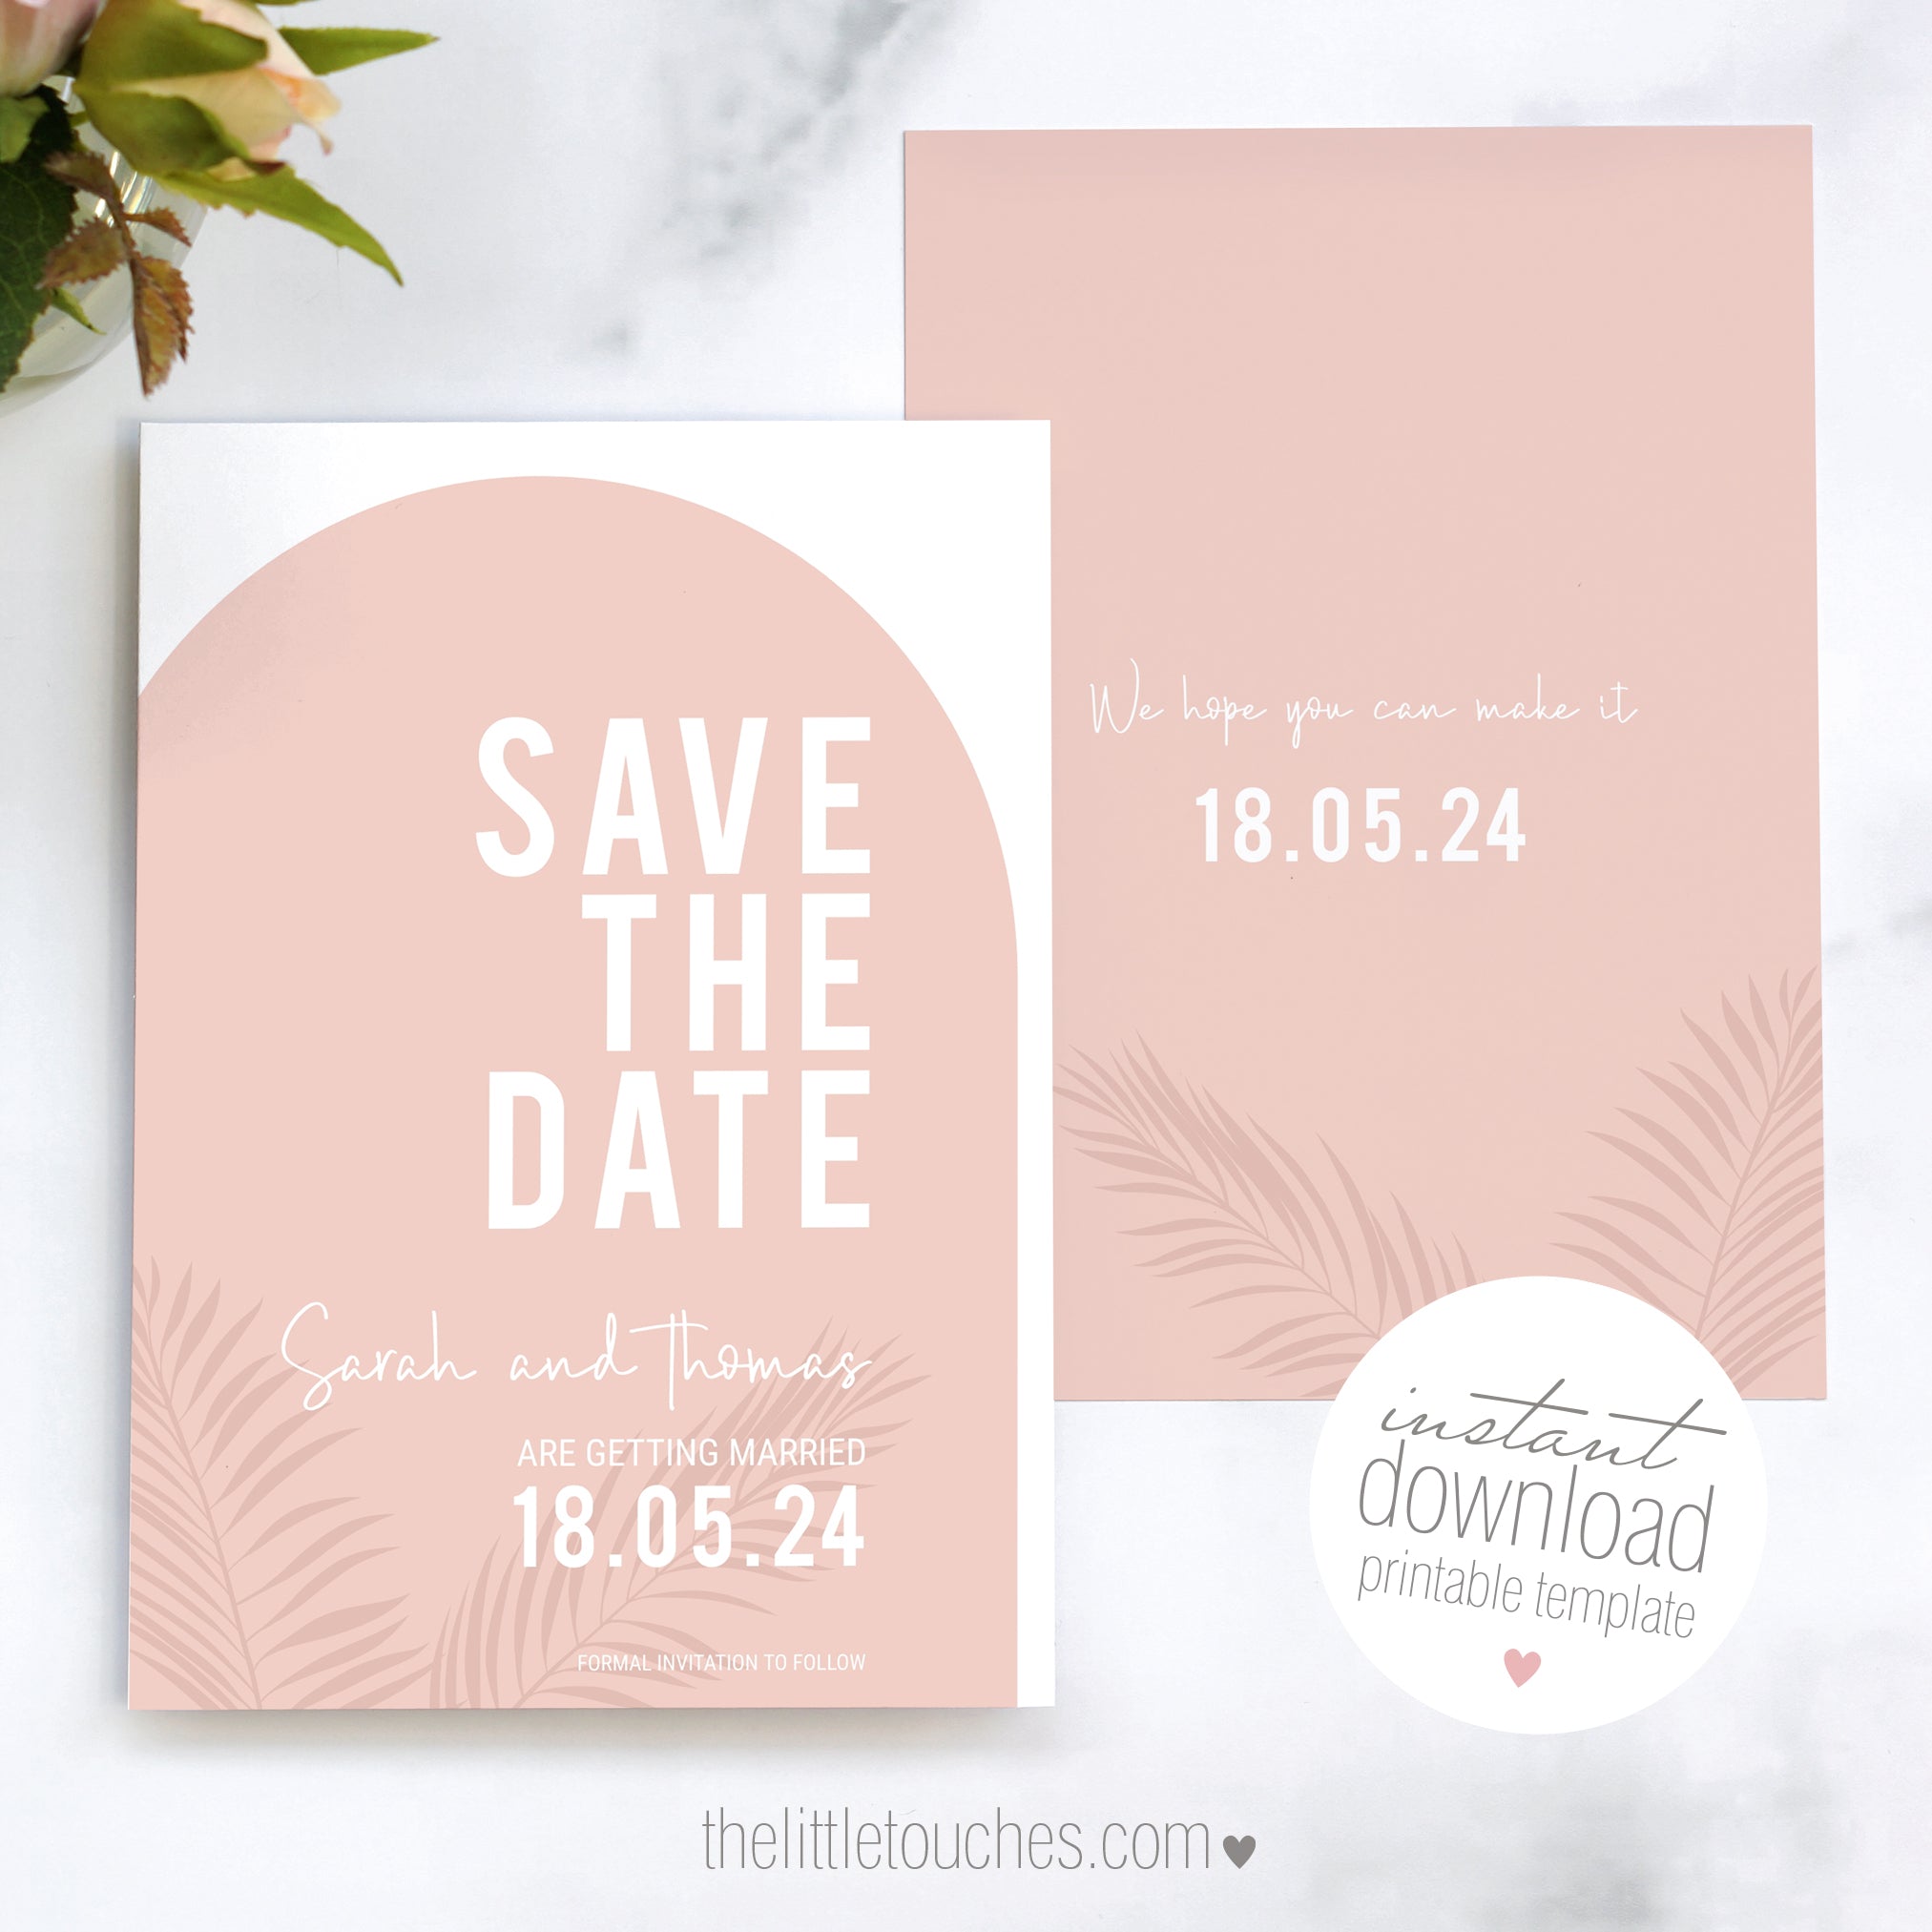 Arch themed Save the date wedding cards